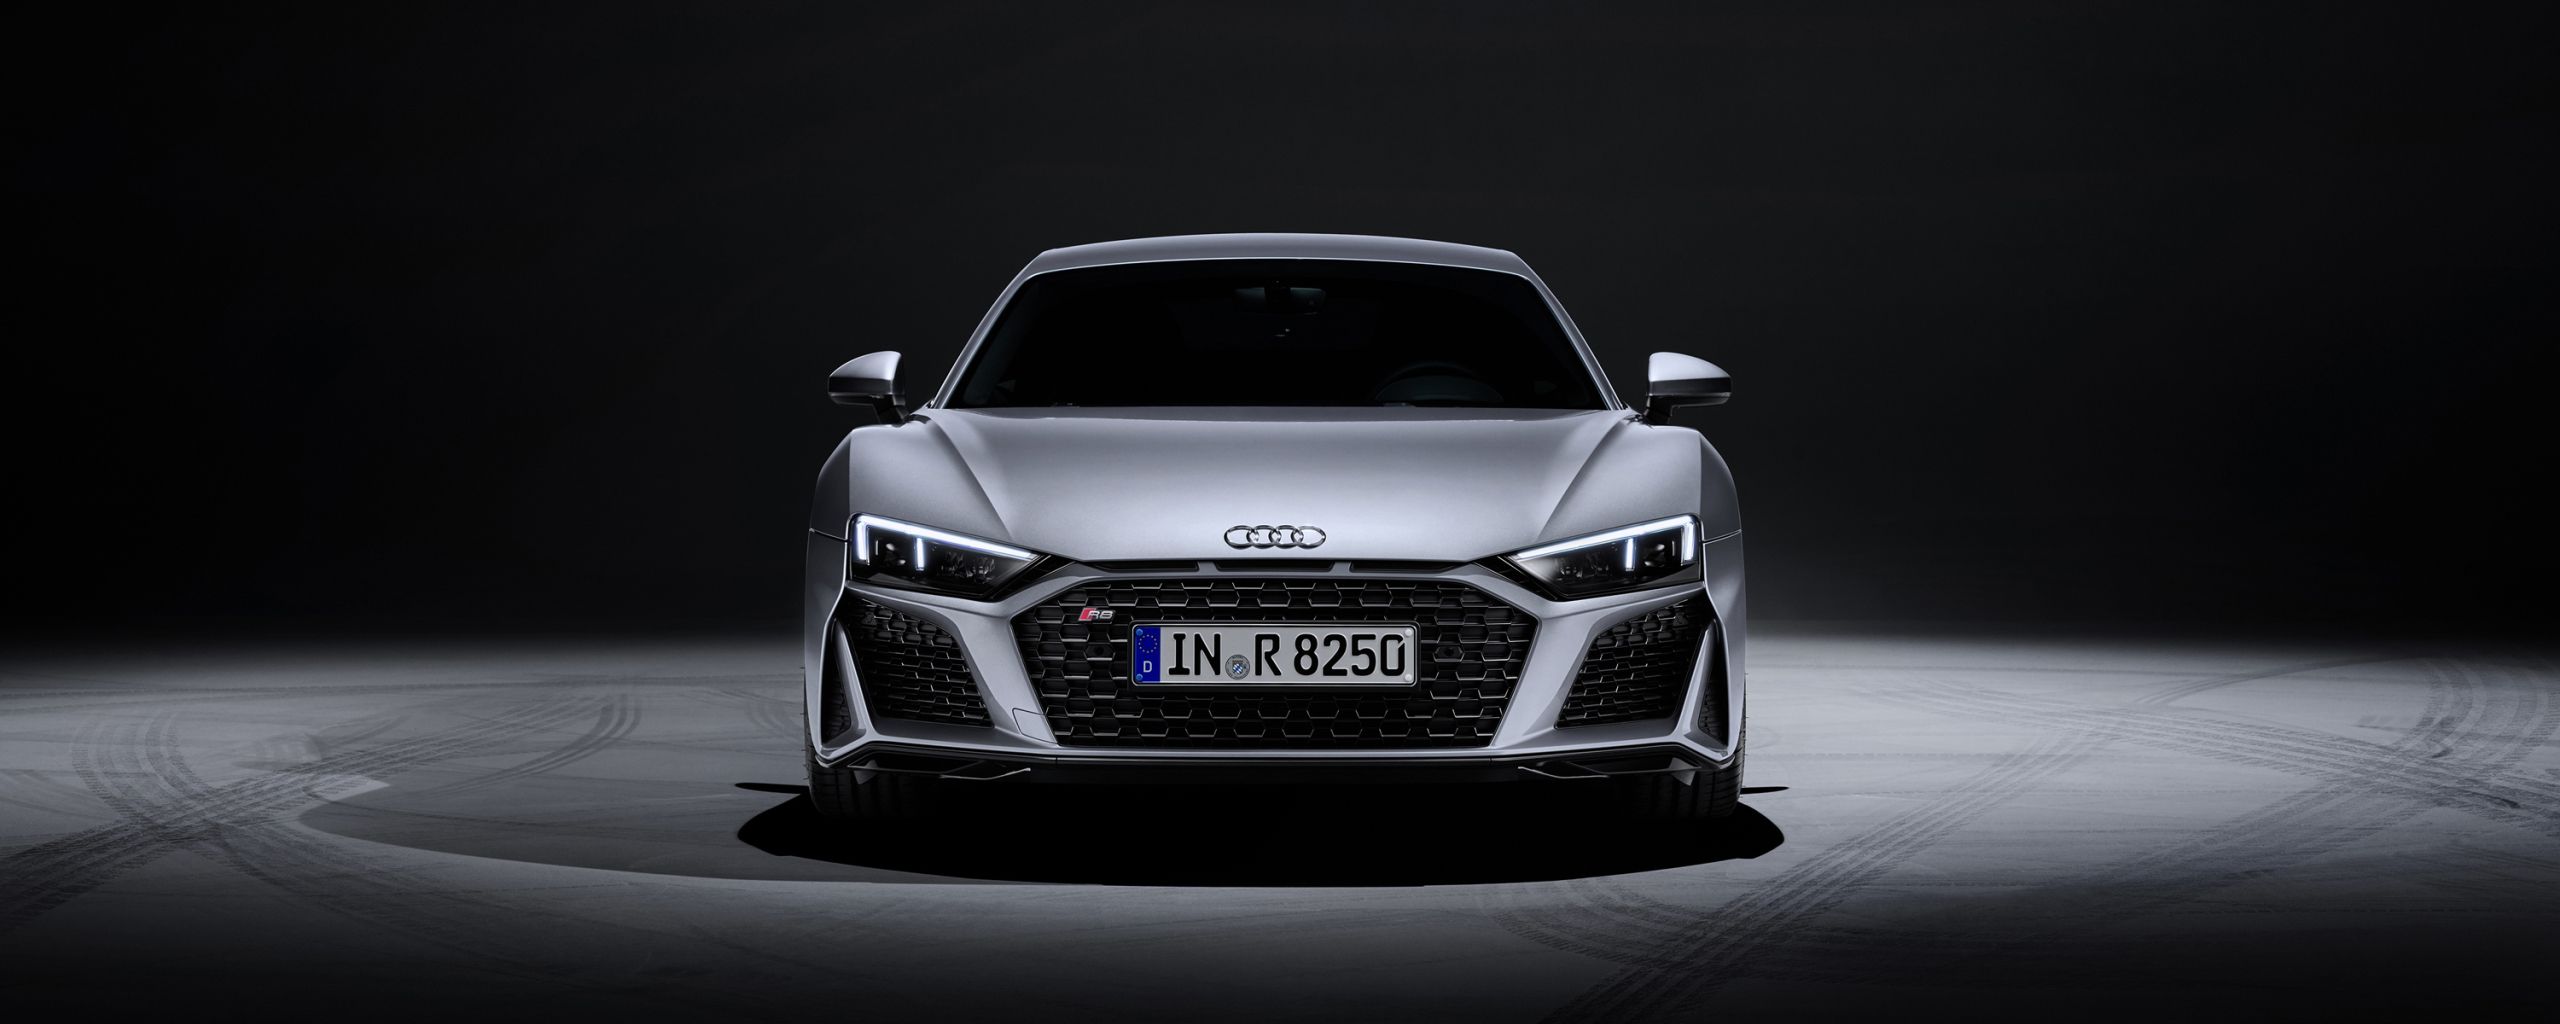 Audi R8 V10 2560x1024 Resolution Wallpaper, HD Cars 4K Wallpaper, Image, Photo and Background